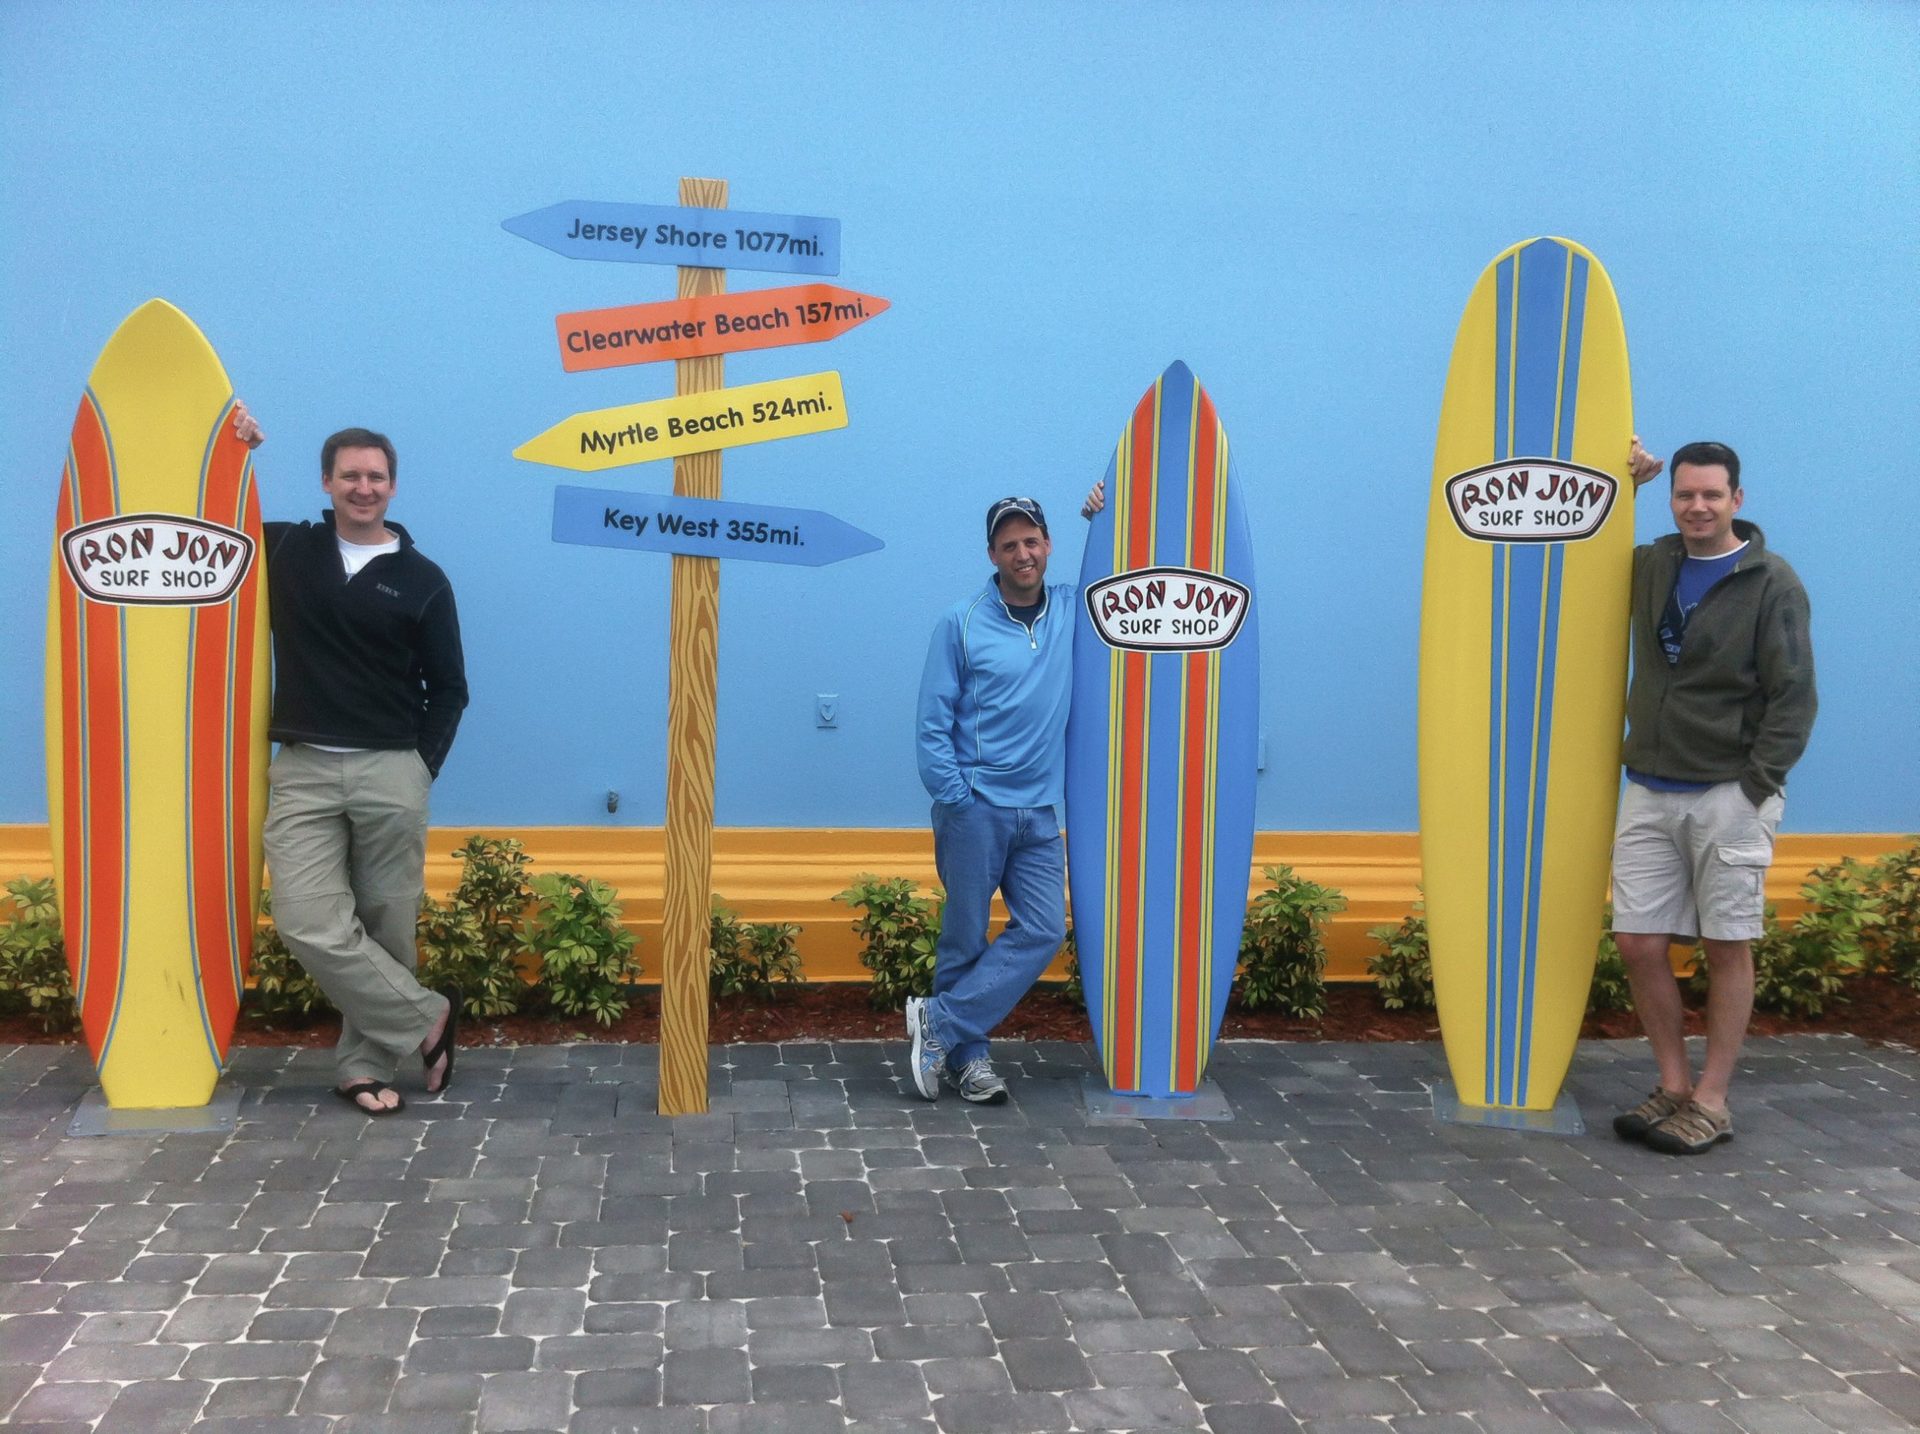 DKY partners Mike Dobies, Mark Yaeger, and Brian Dahl and Ron Jon's Surf Shop